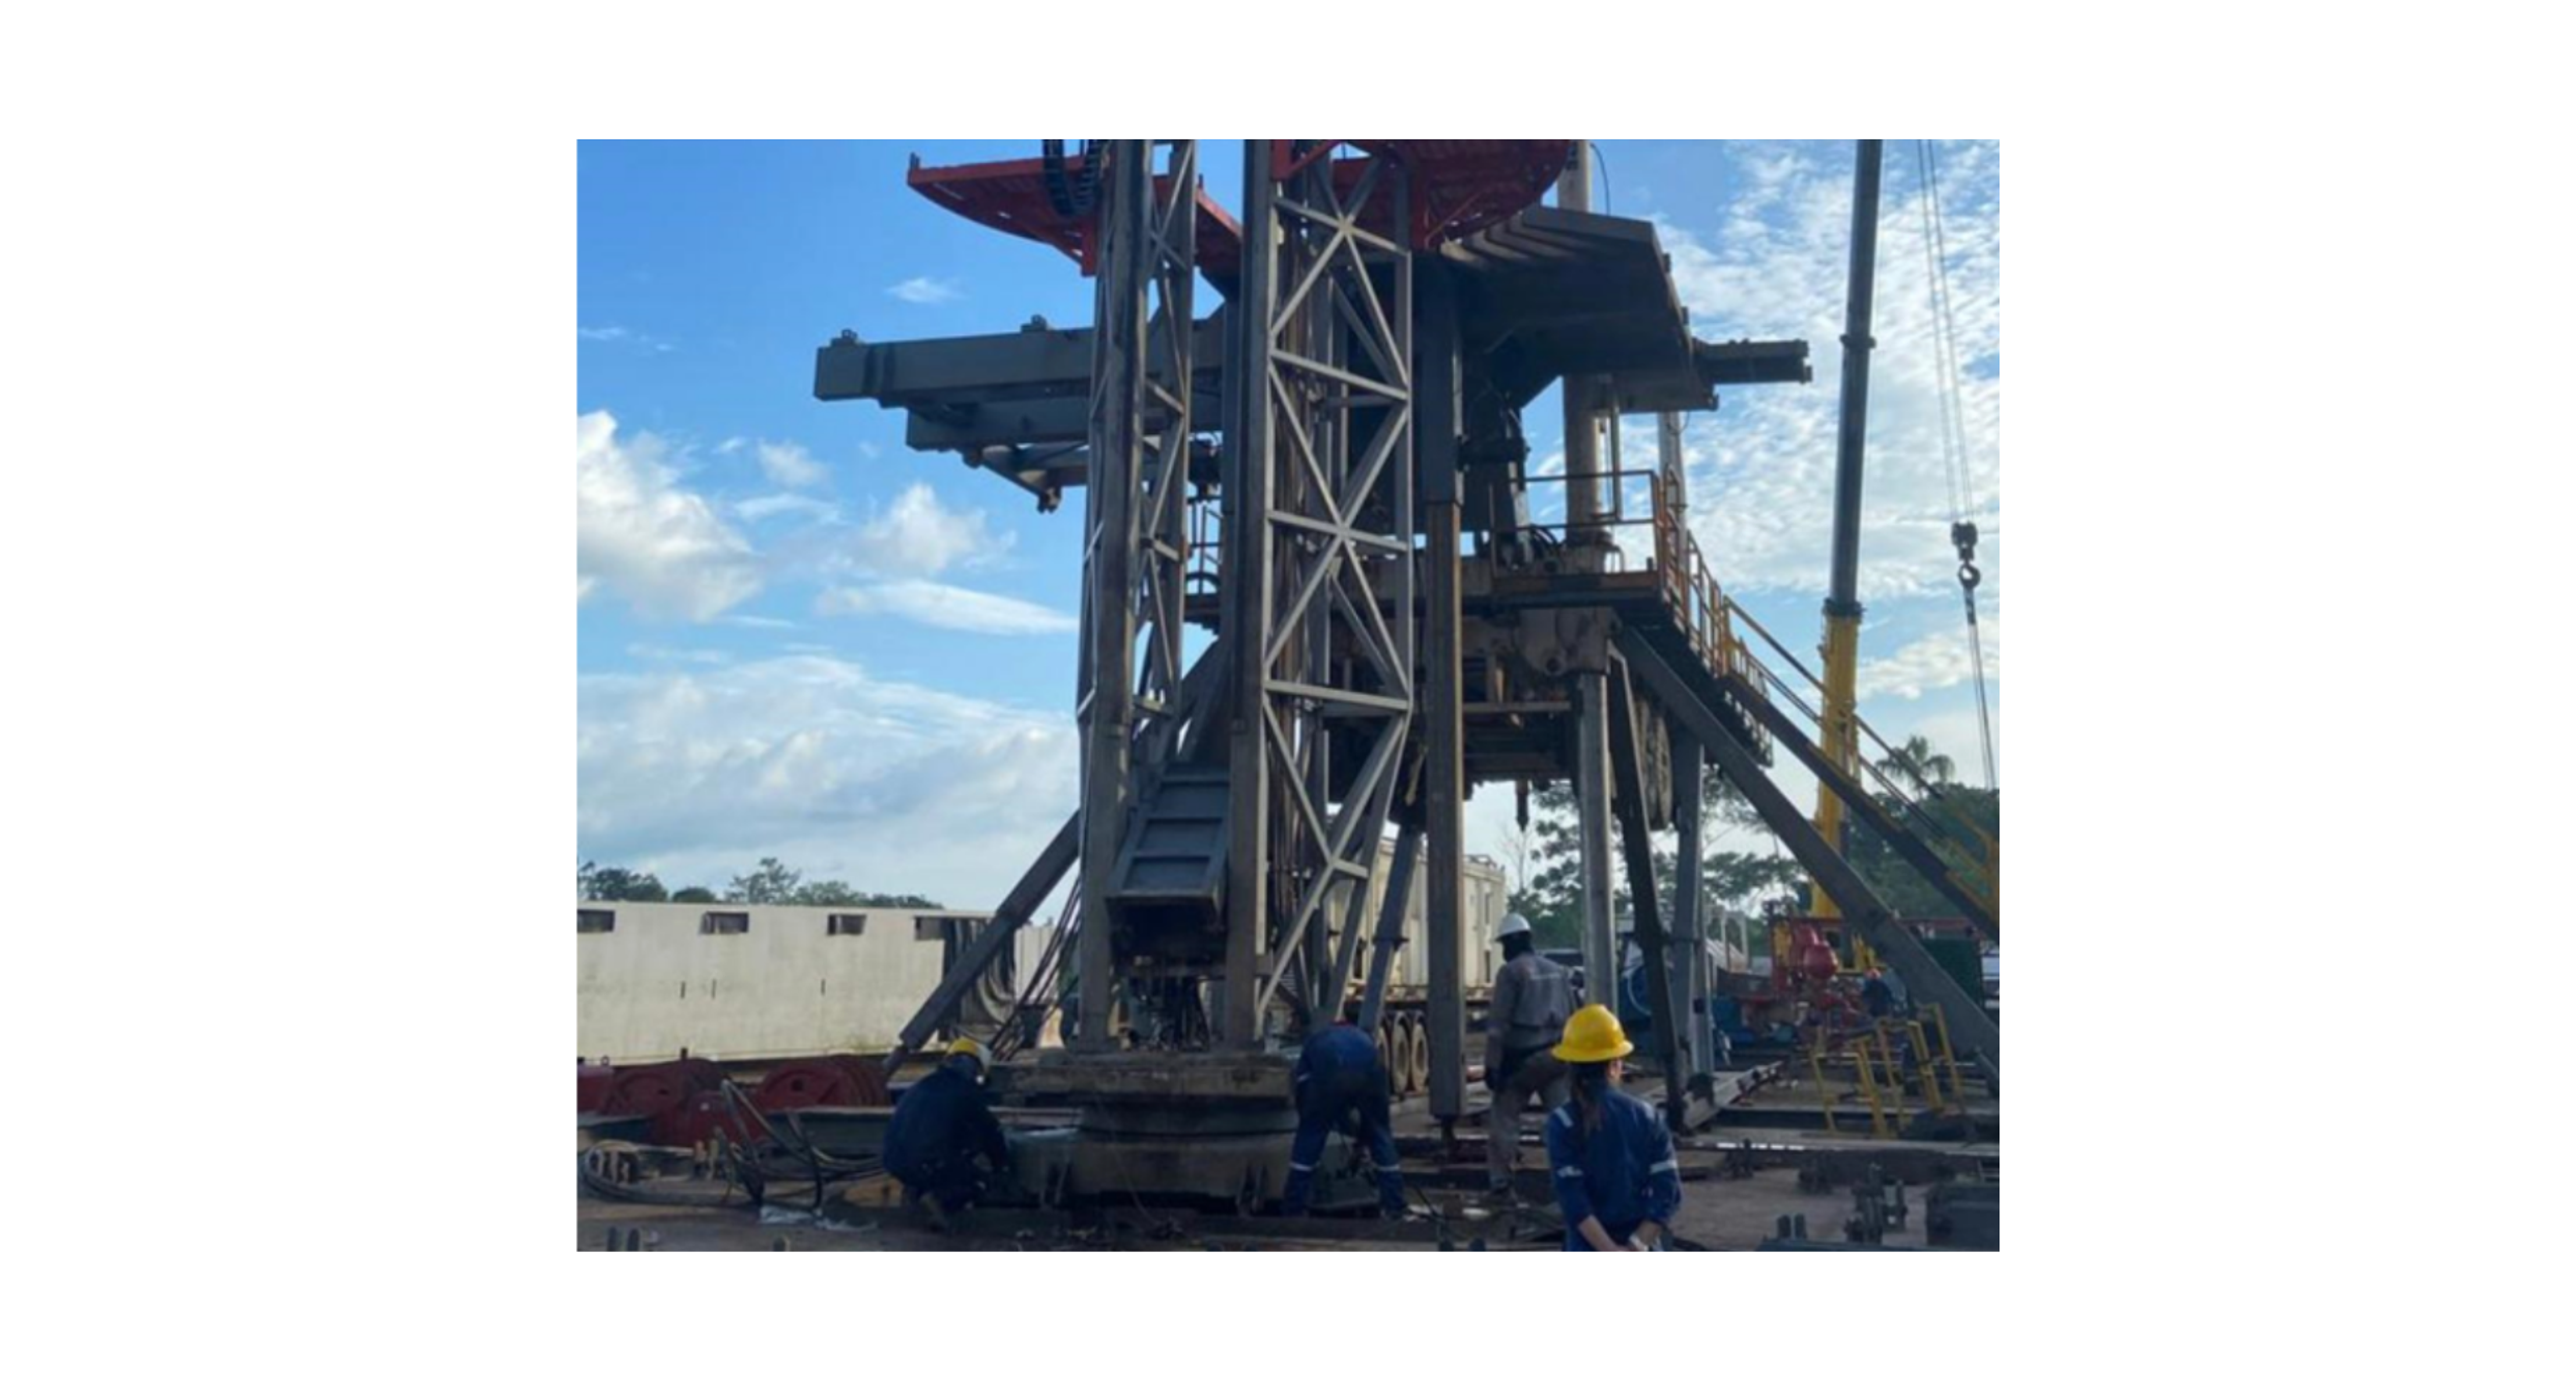 NG Energy International Reports Preparing To Spud First Well At Prospective Flagship Asset, Finalizing First Contract For Gas Sale